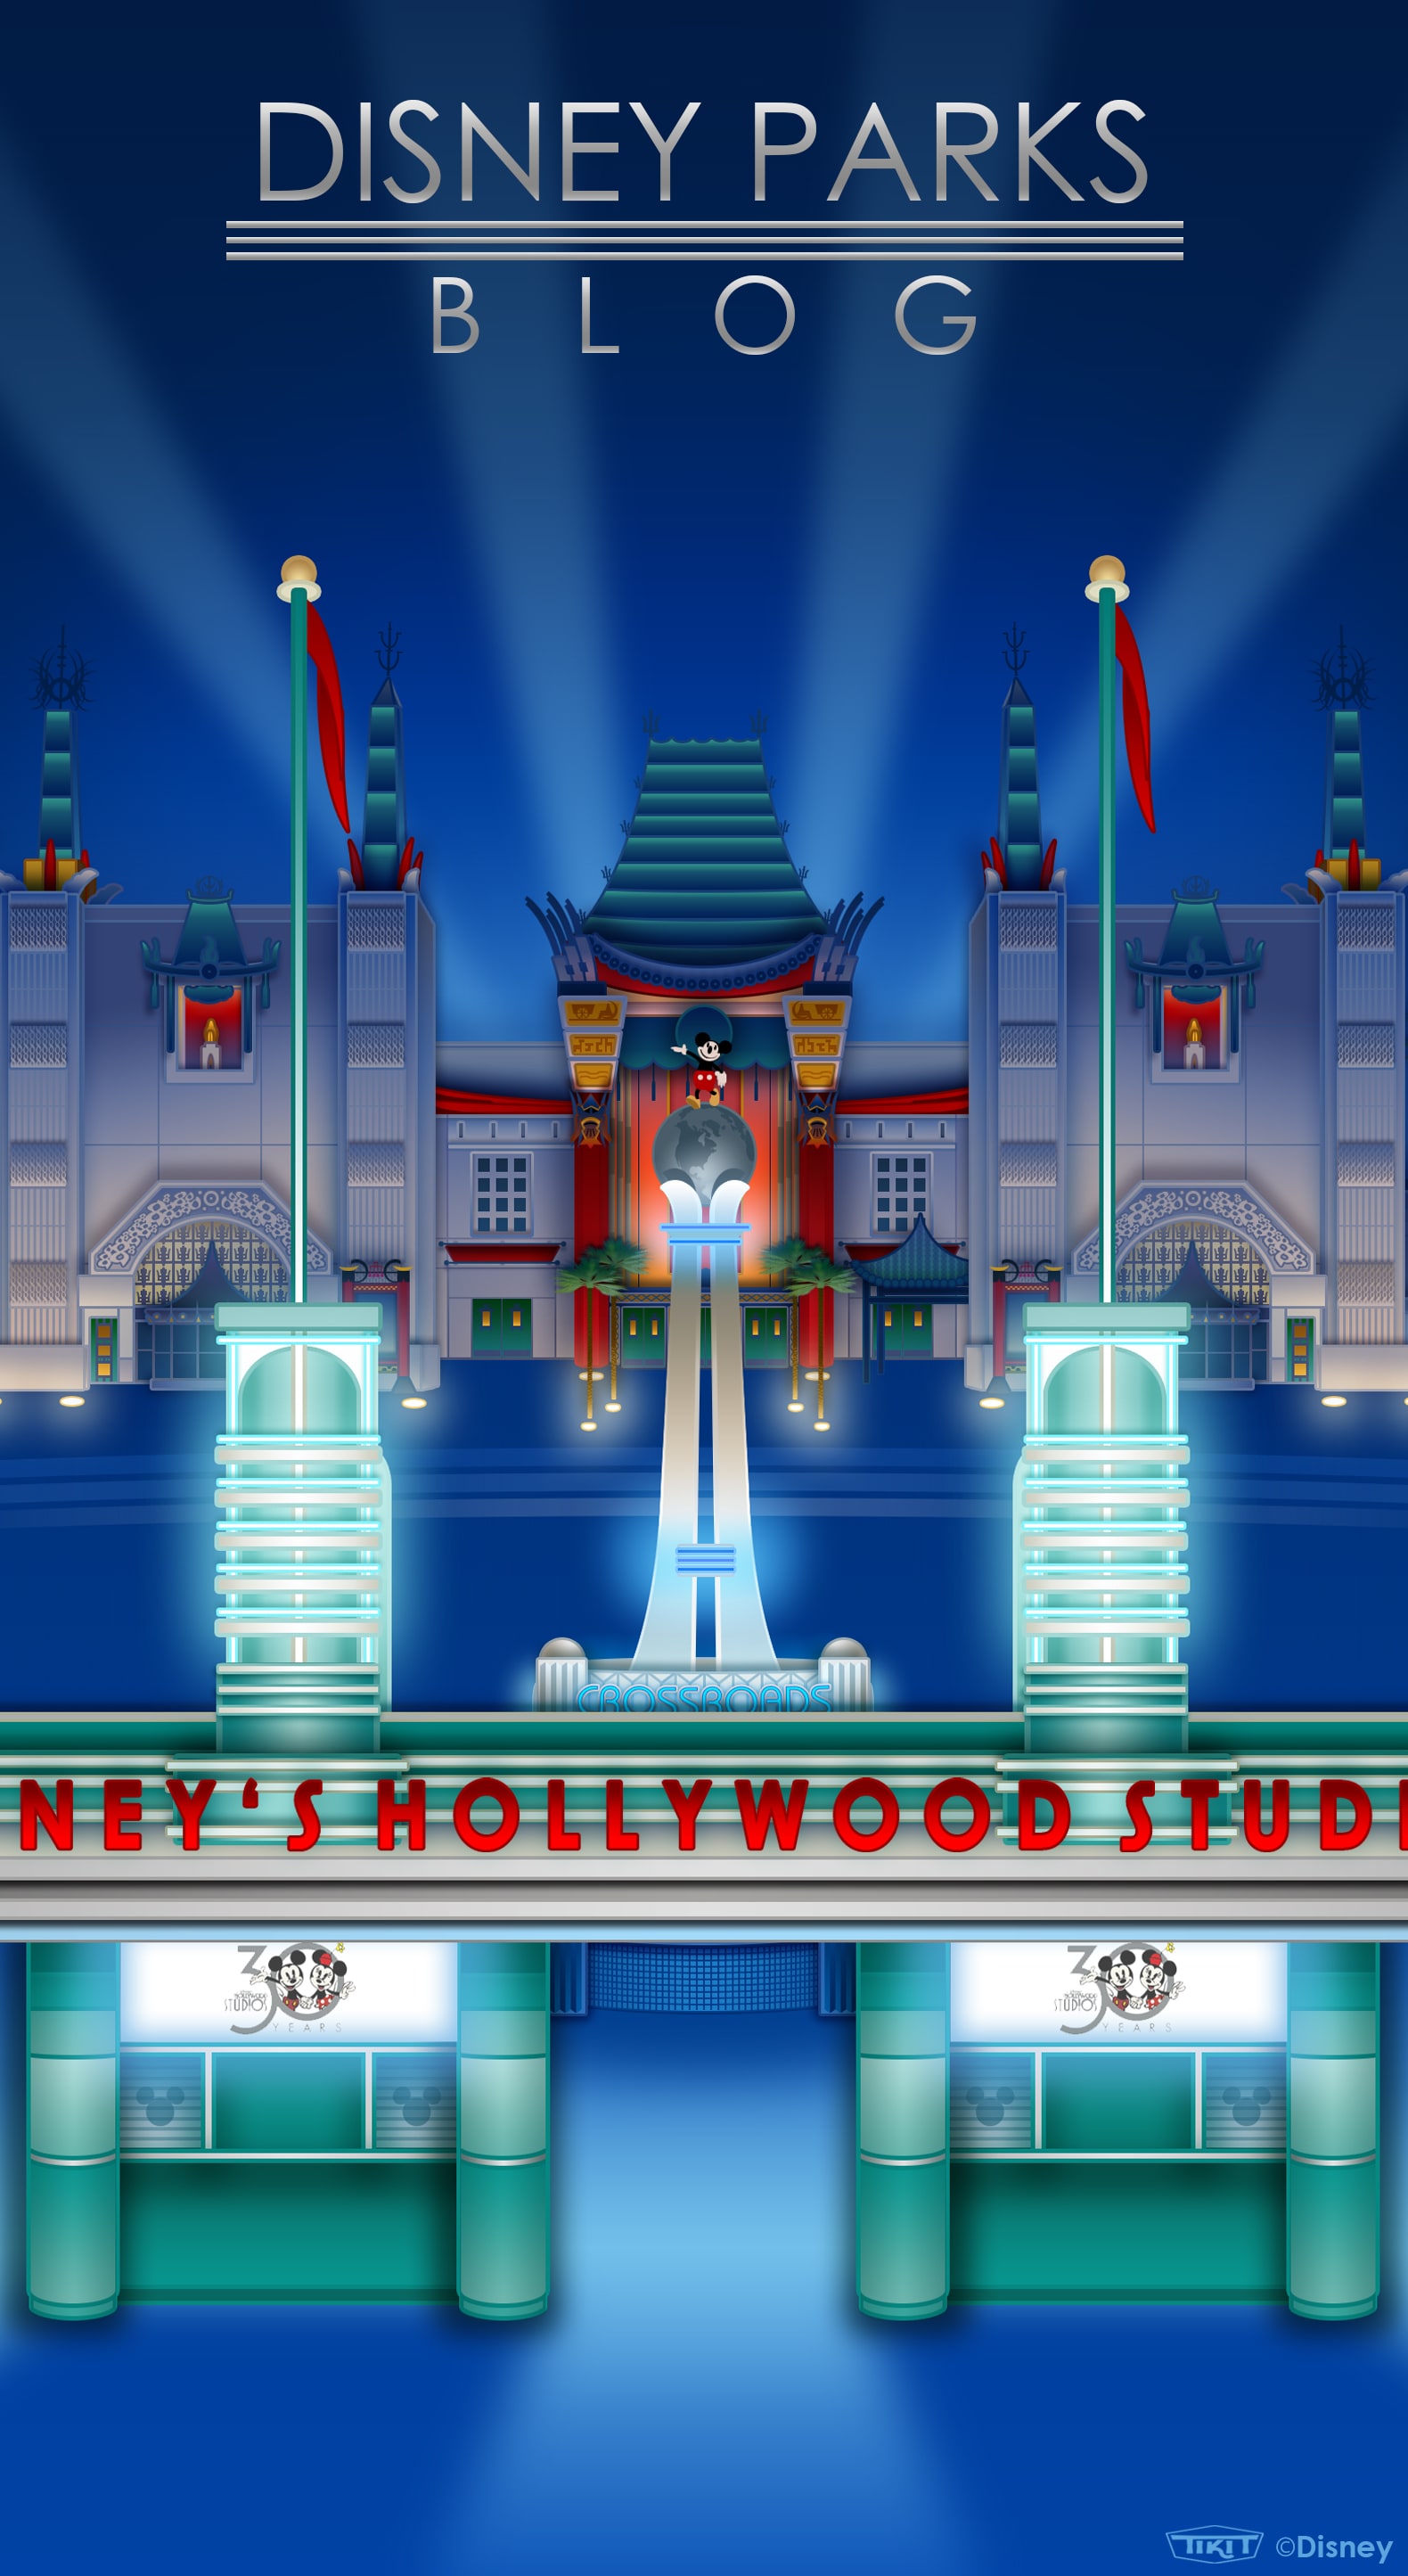 Disney S Hollywood Studios 30th Anniversary Wallpaper Iphone Android Disney Parks Blog